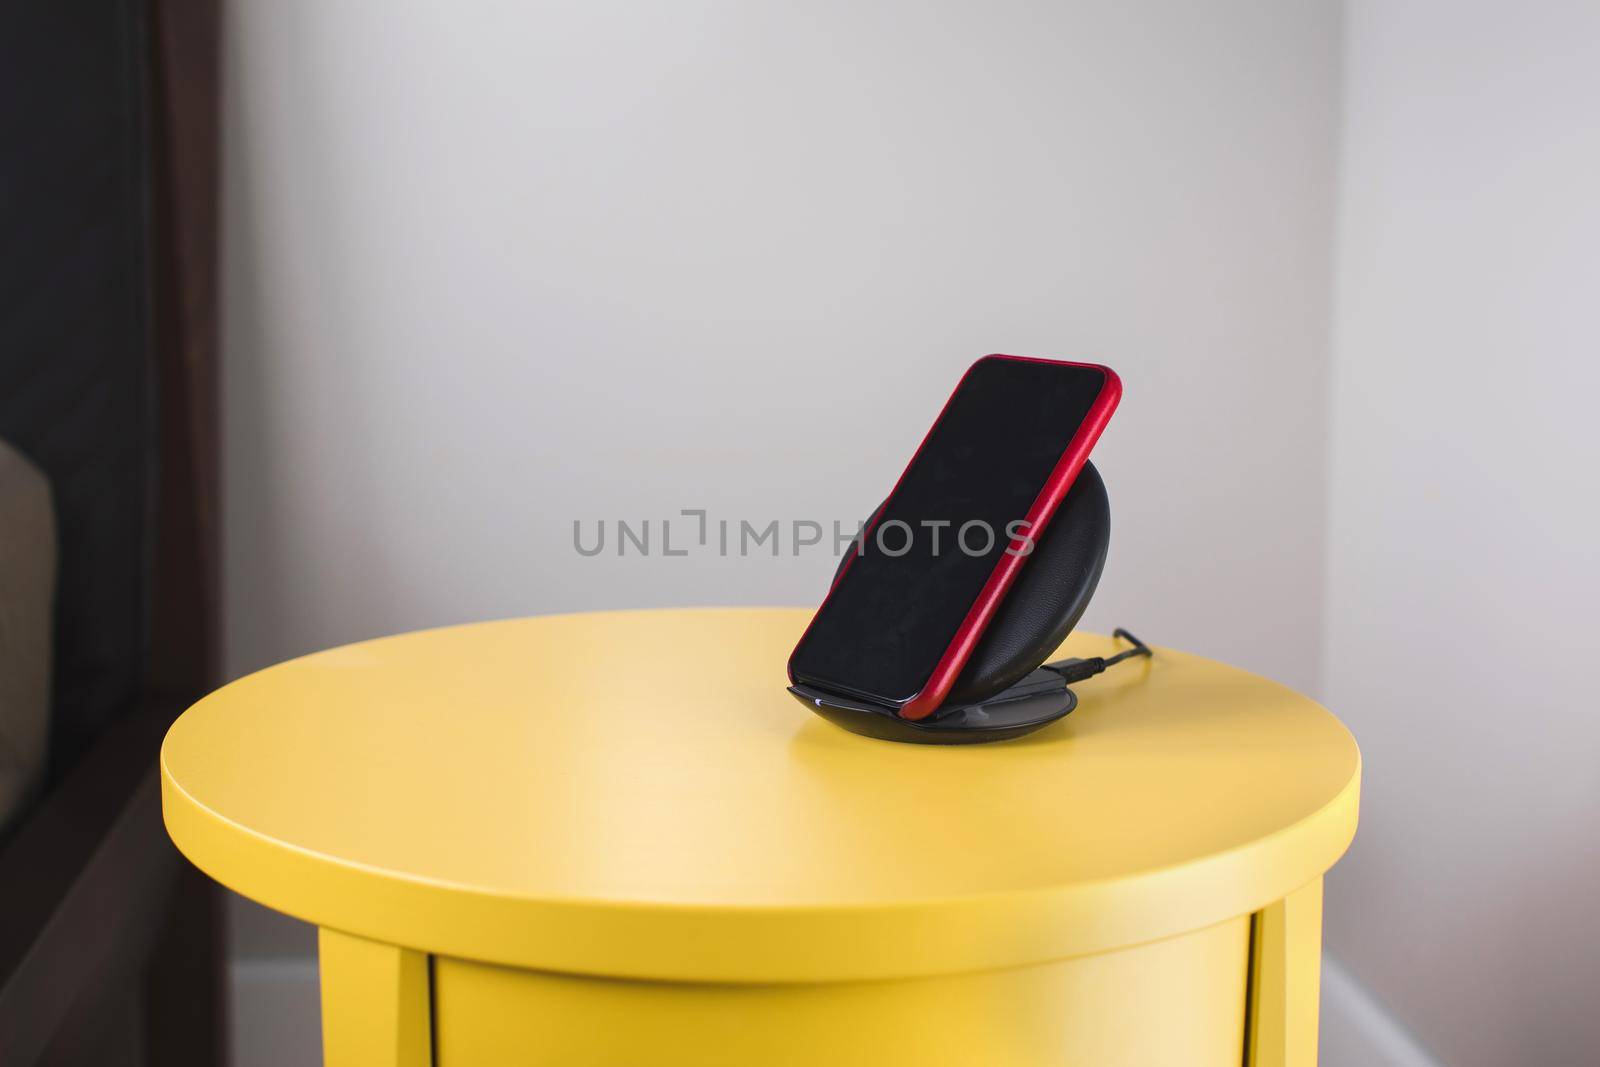 Smartphone is placed on a wireless fast charger station